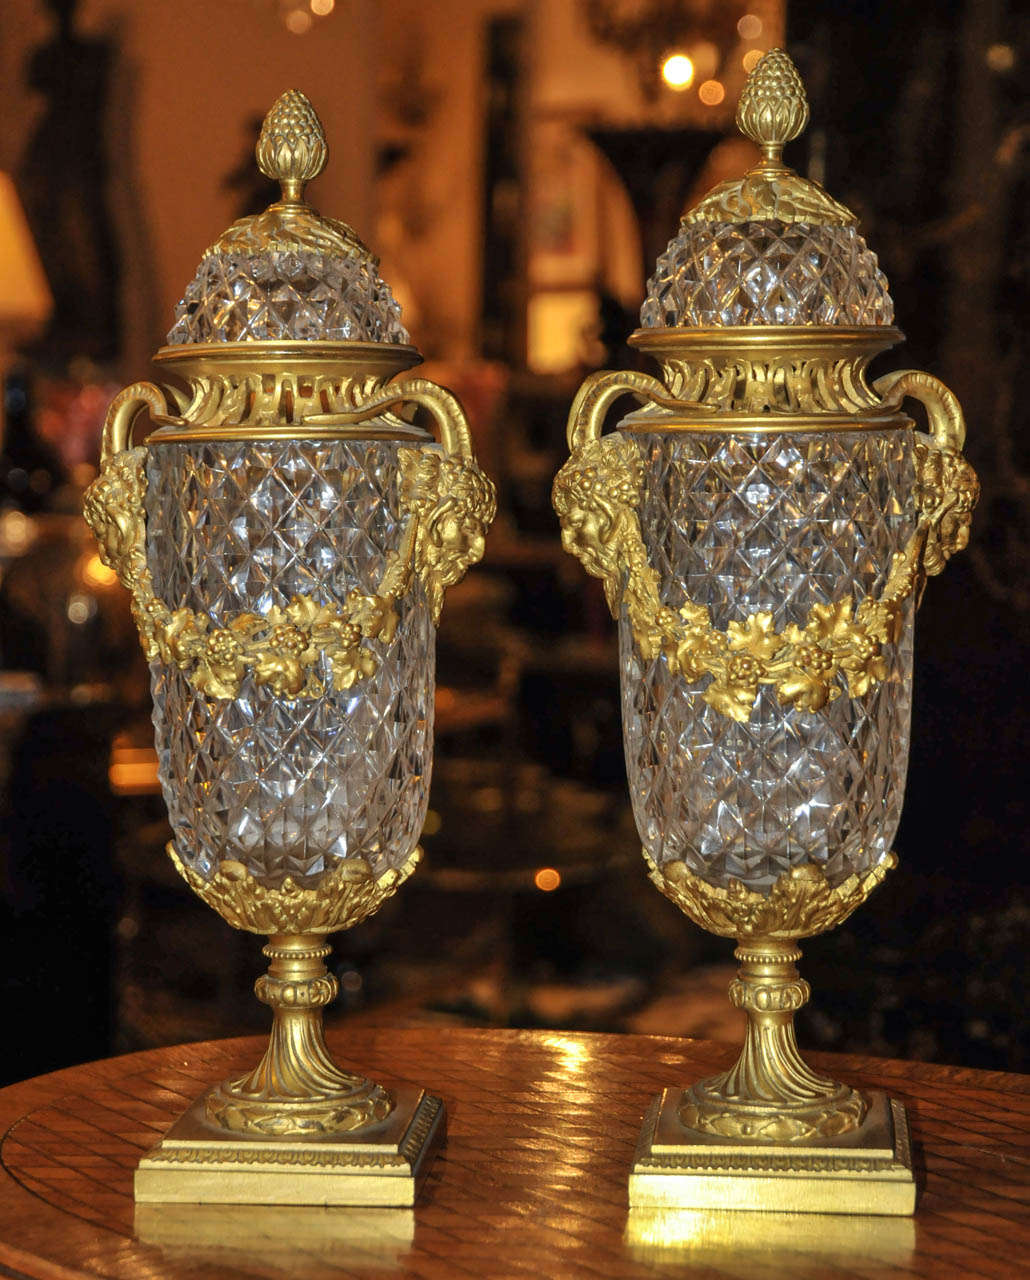 Pair of 19th Century incense burner in bronze and Baccarat cristal. Very good condition. Normal wear consistent with age and use.